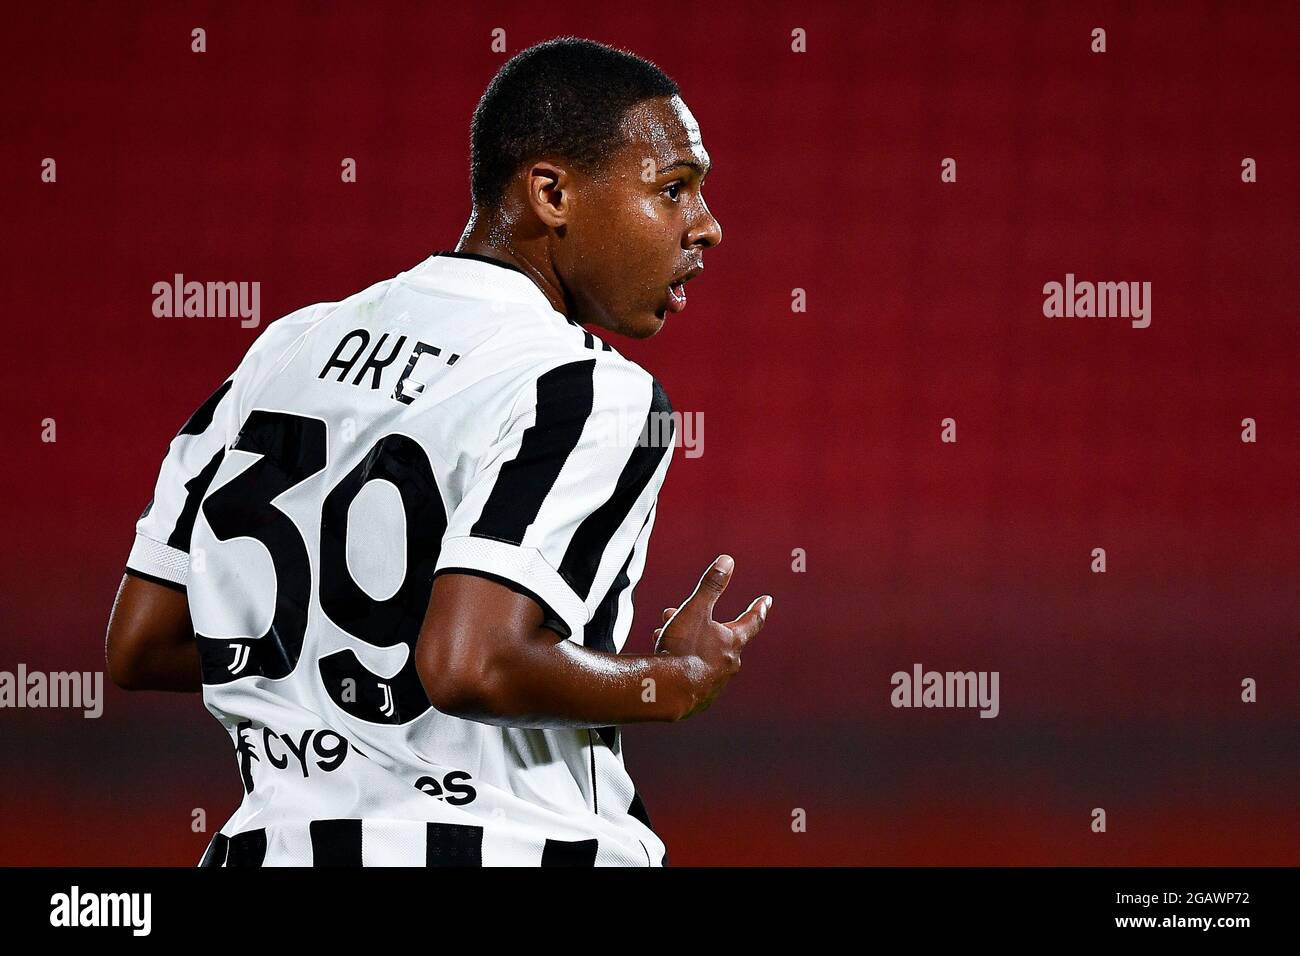 Monza, Italy. 31 July 2021. Marley Ake of Juventus FC looks on during the Luigi Berlusconi Trophy football match between AC Monza and Juventus FC. Juventus FC won 2-1 over AC Monza. Credit: Nicolò Campo/Alamy Live News Stock Photo